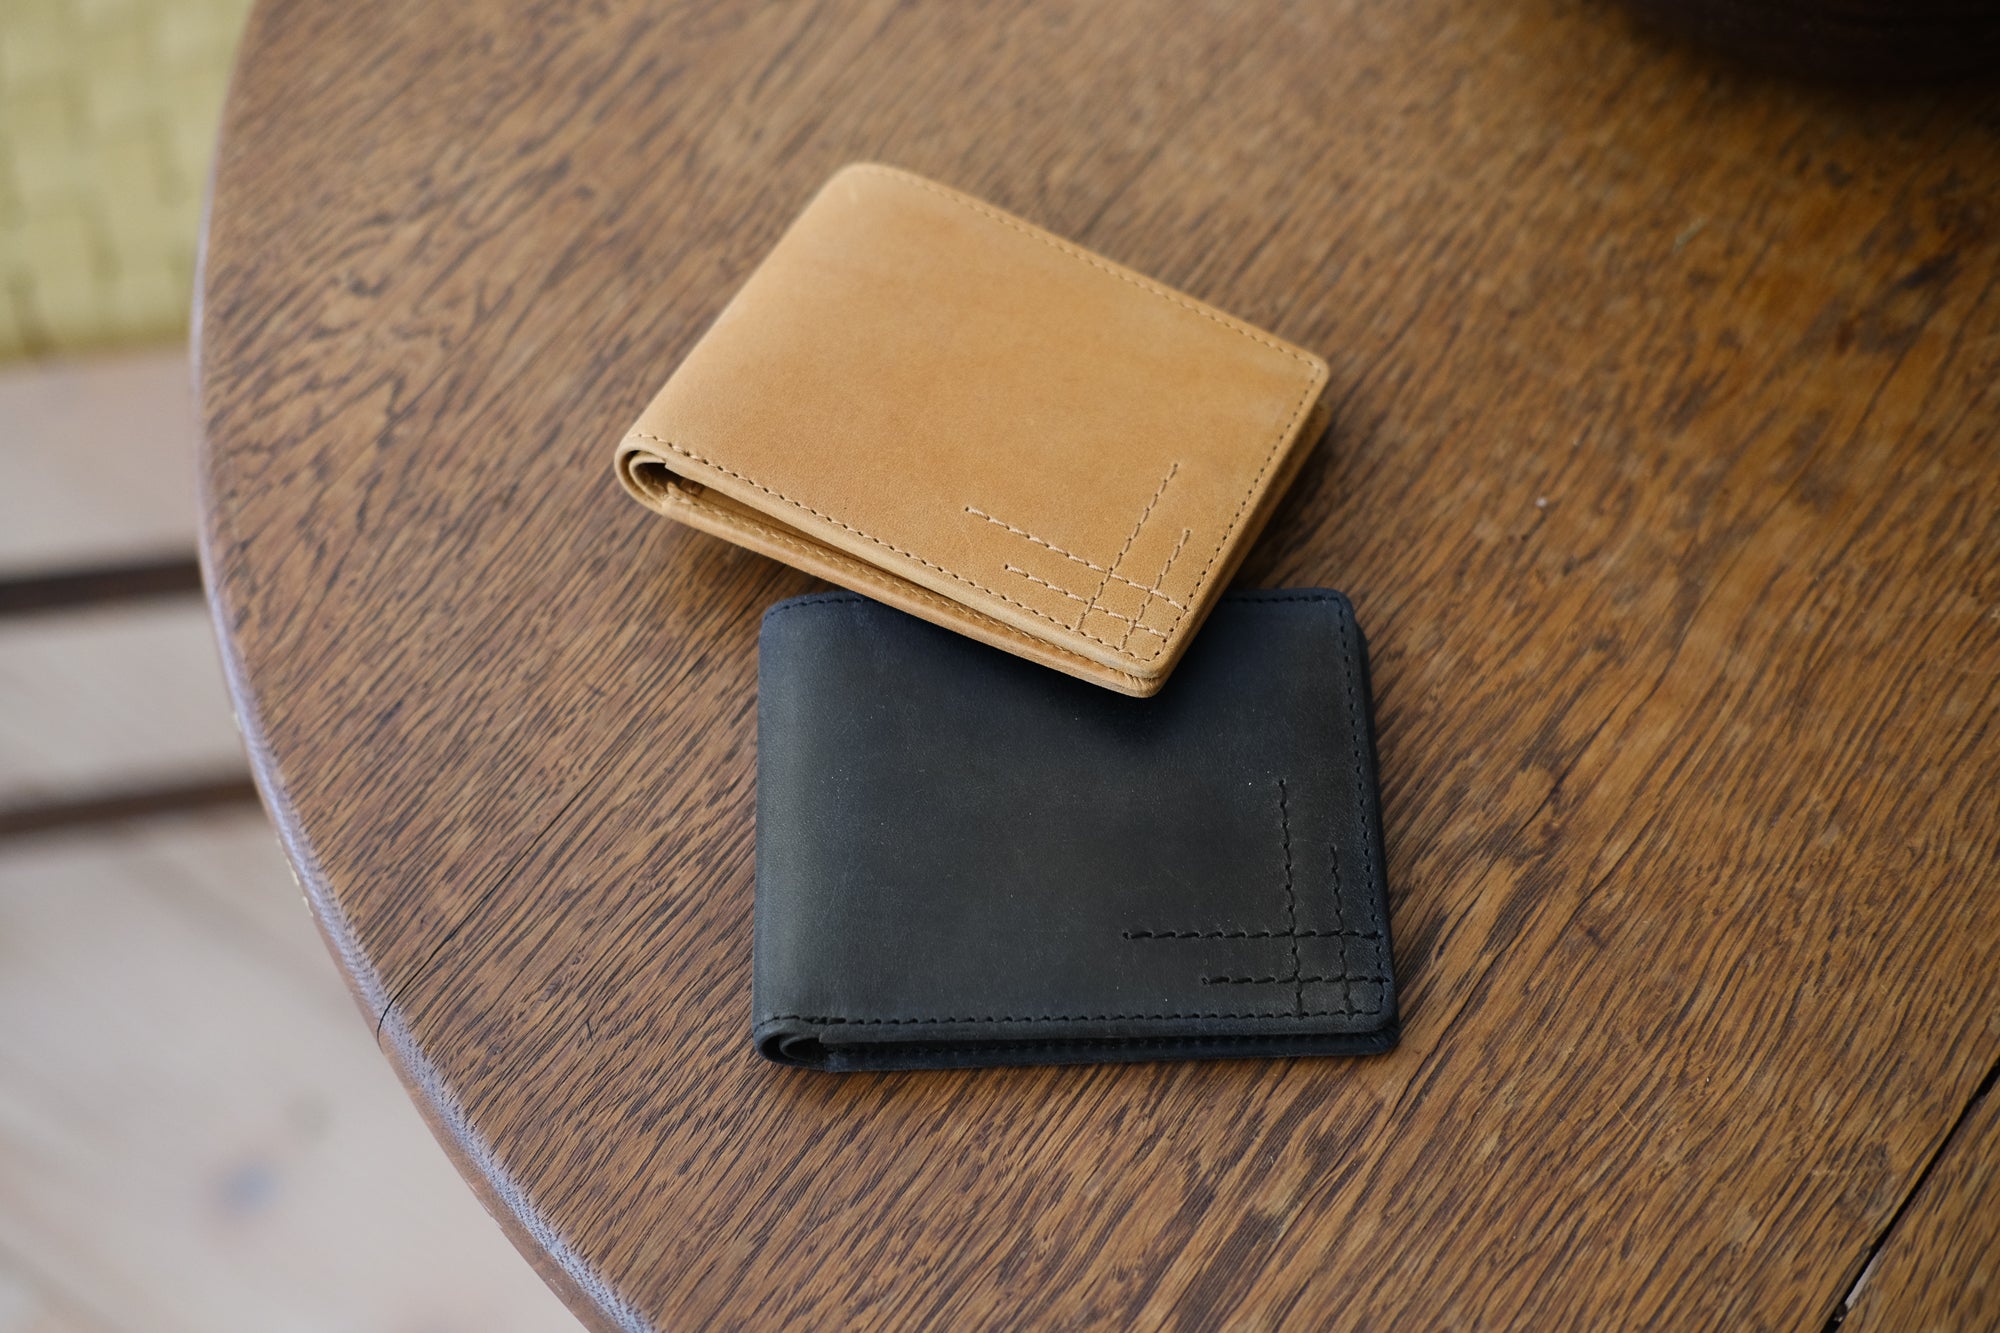 Wallet Collection.